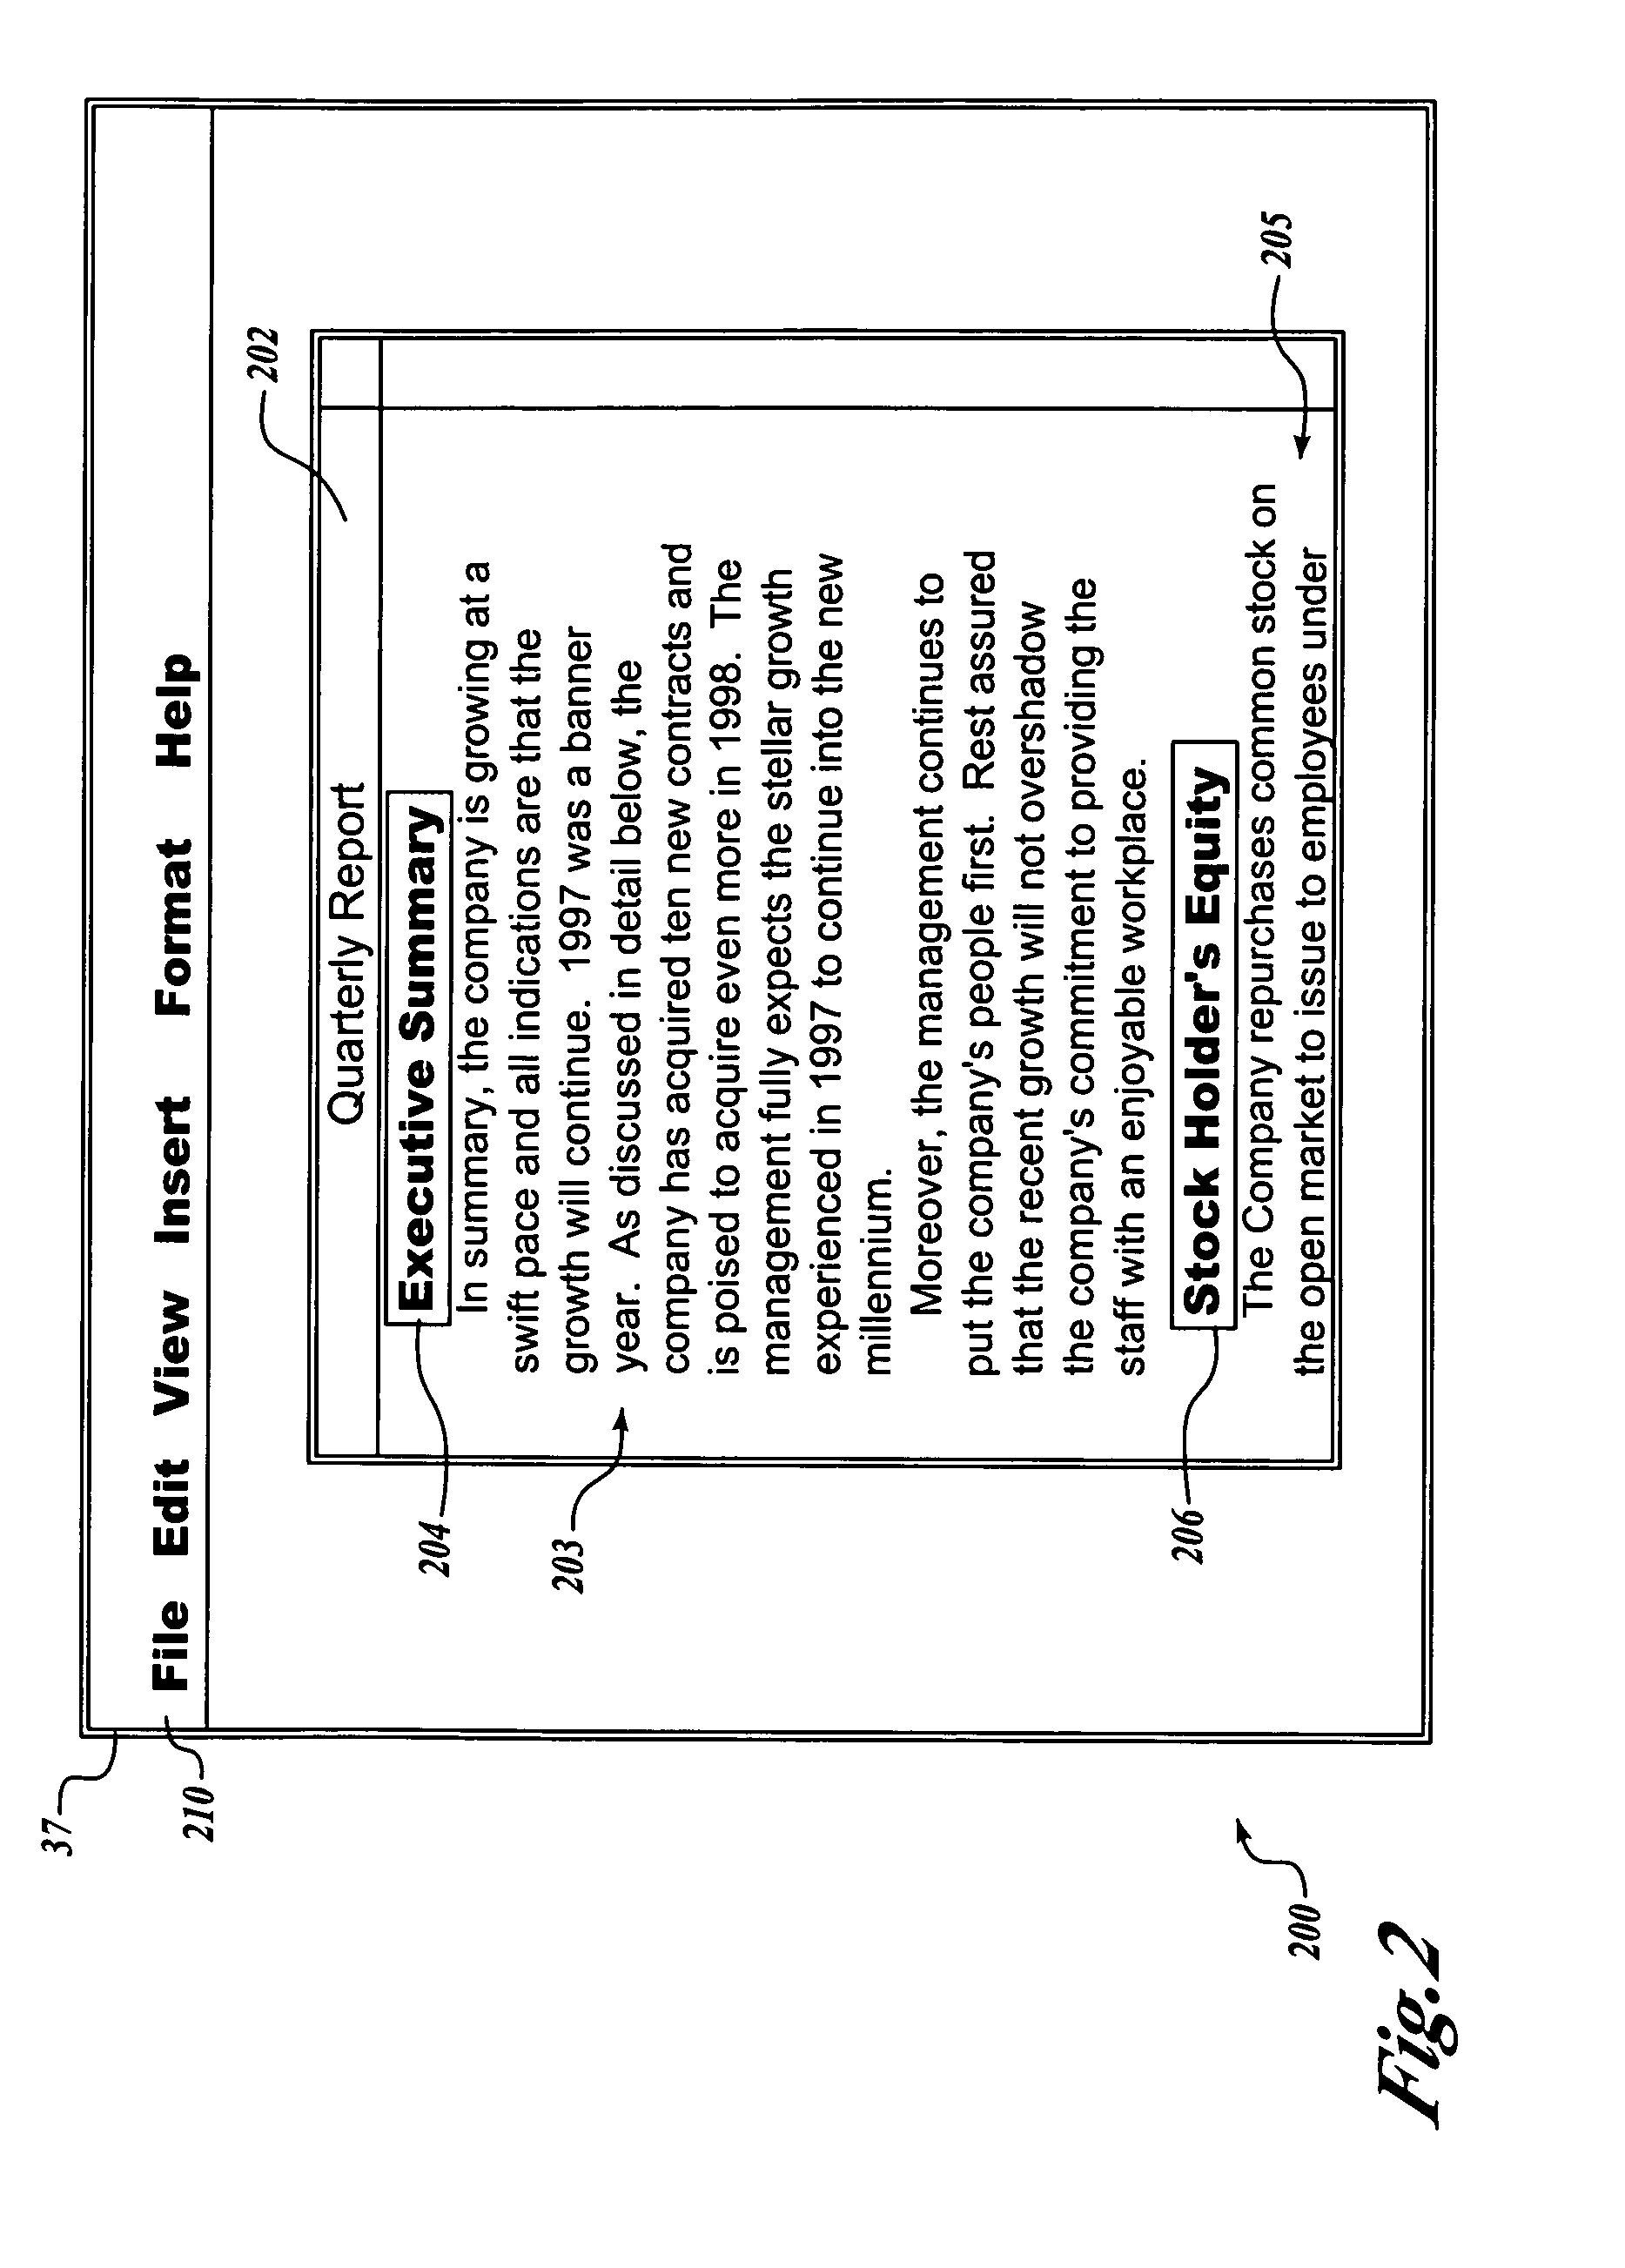 System and method for updating a table-of-contents in a frameset